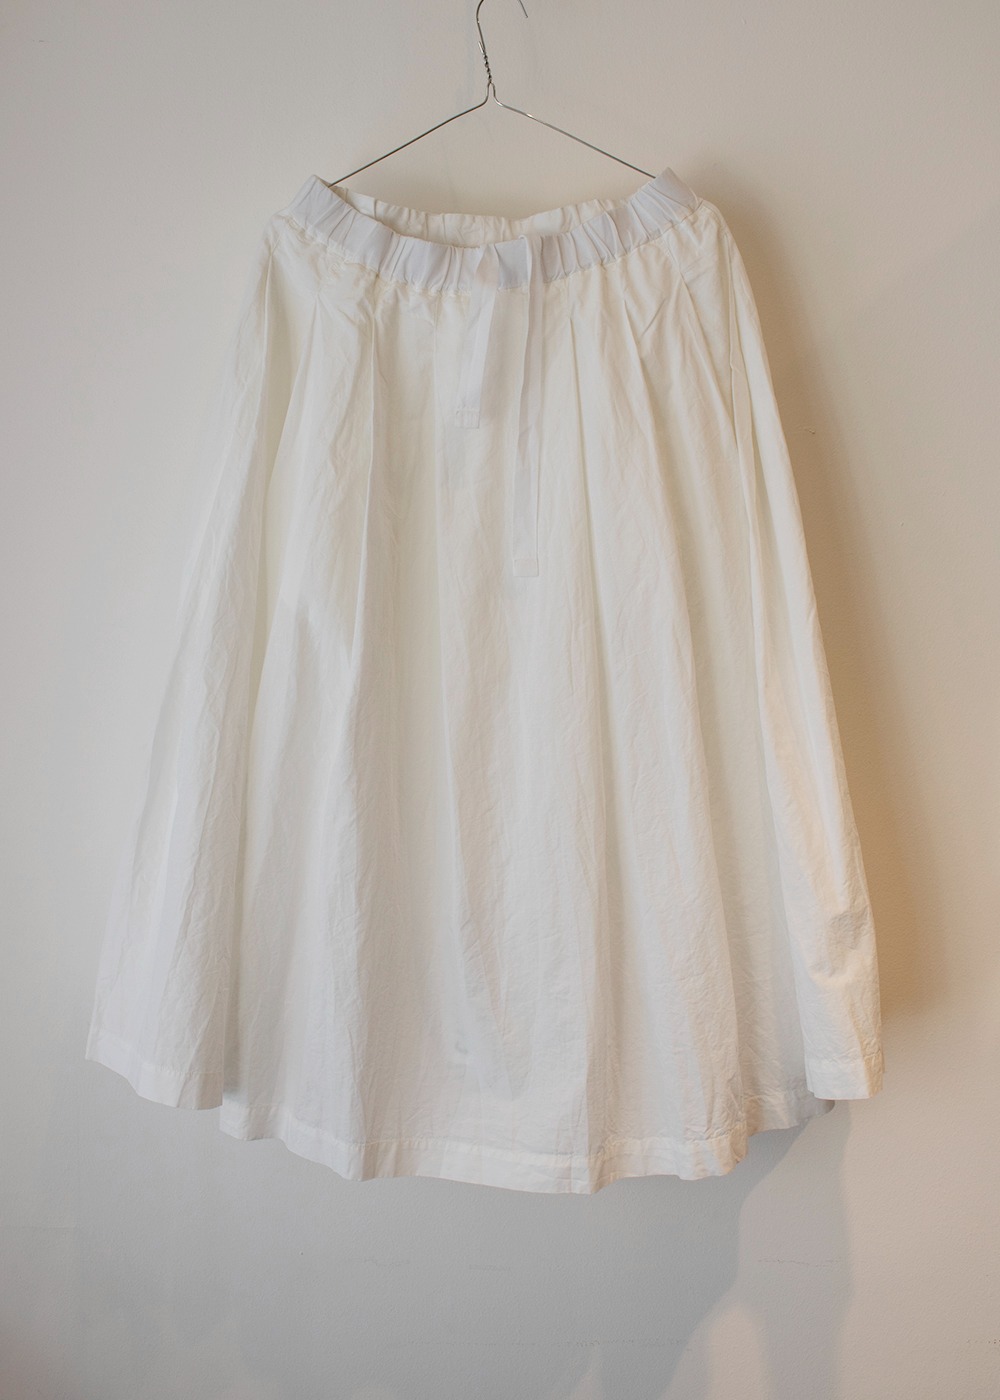 Bowling Skirt - Off White